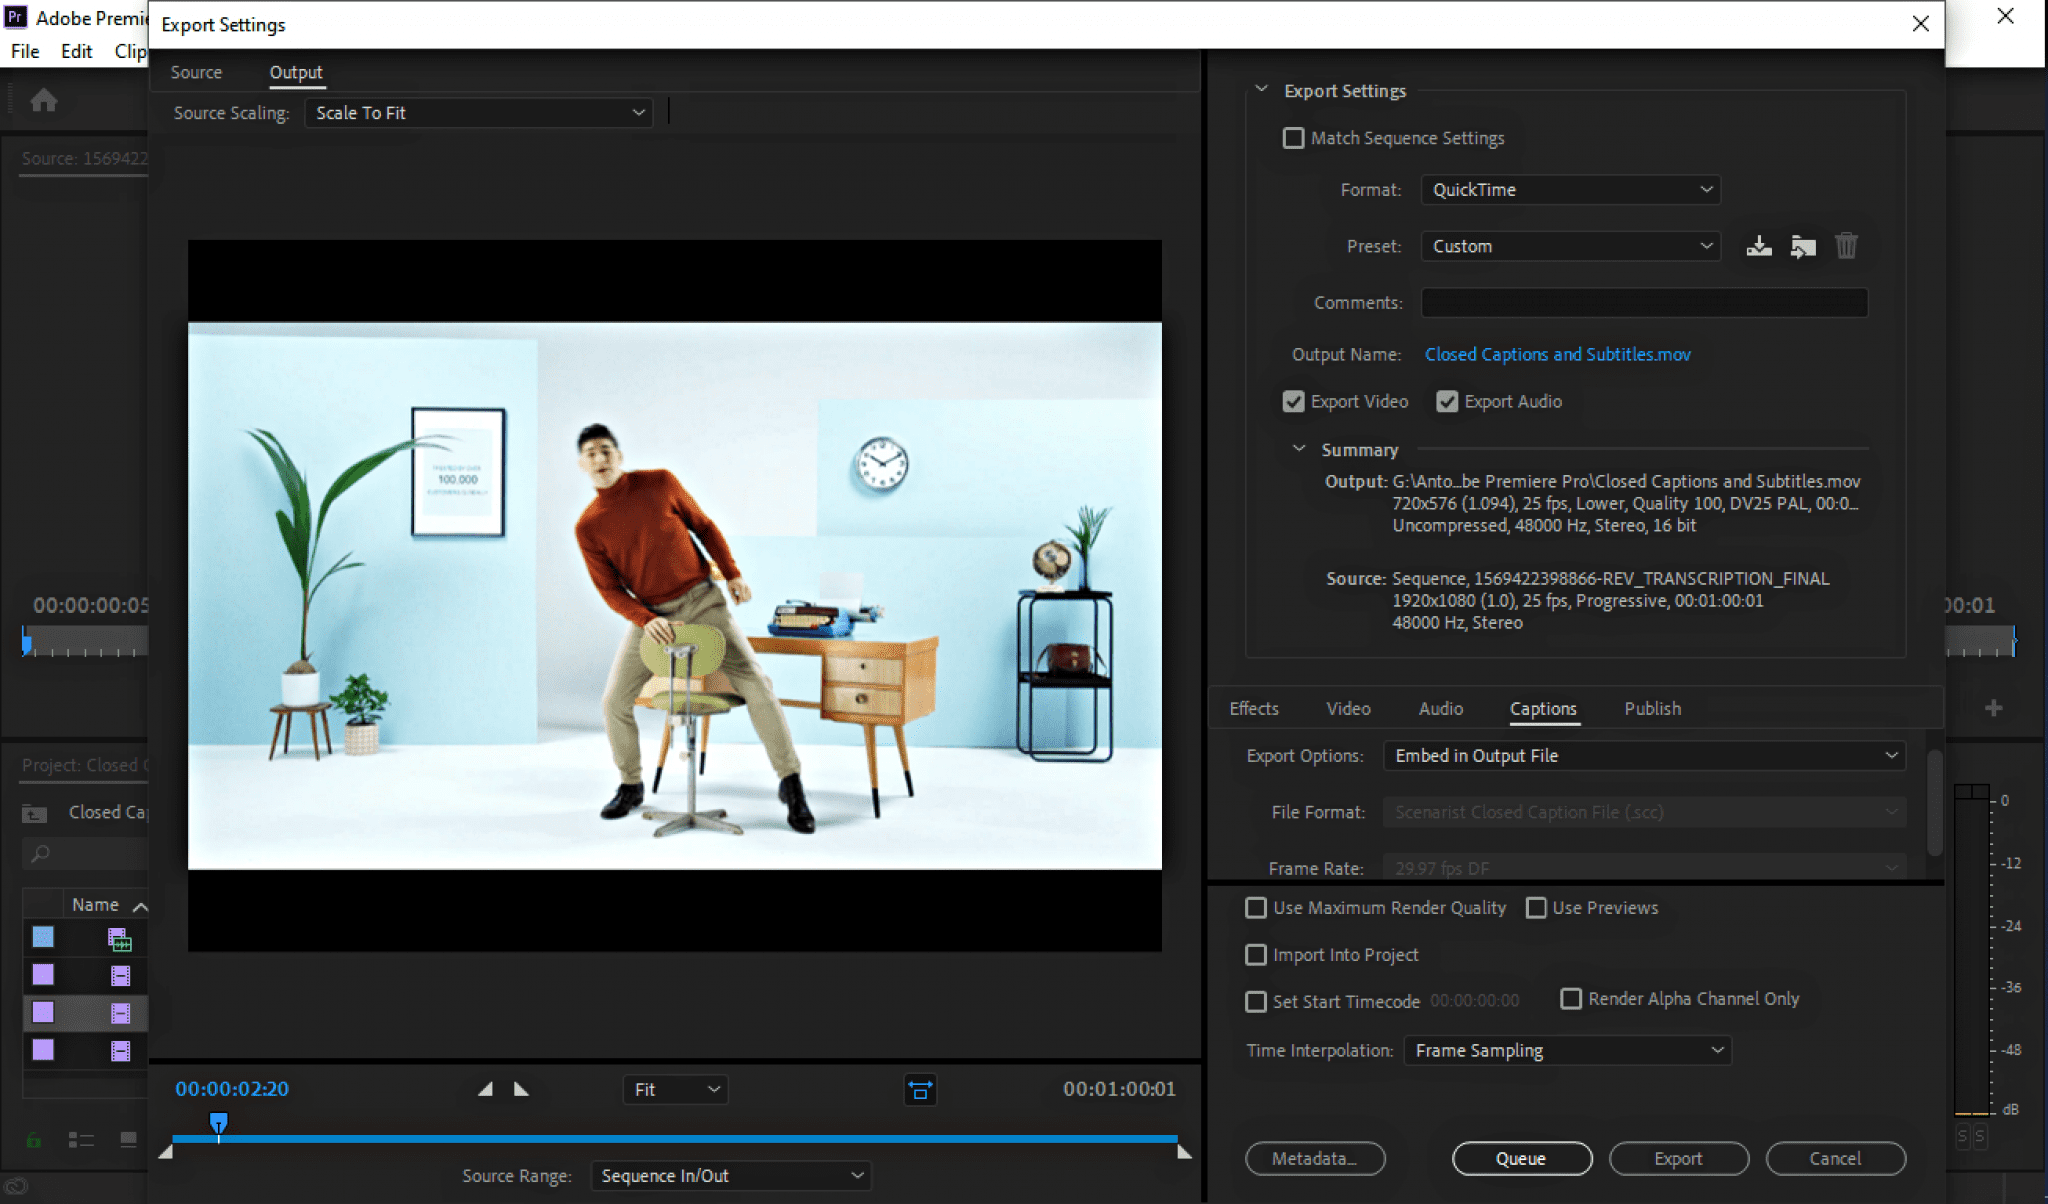 How to Add Captions and Subtitles in Adobe Premiere Pro Rev